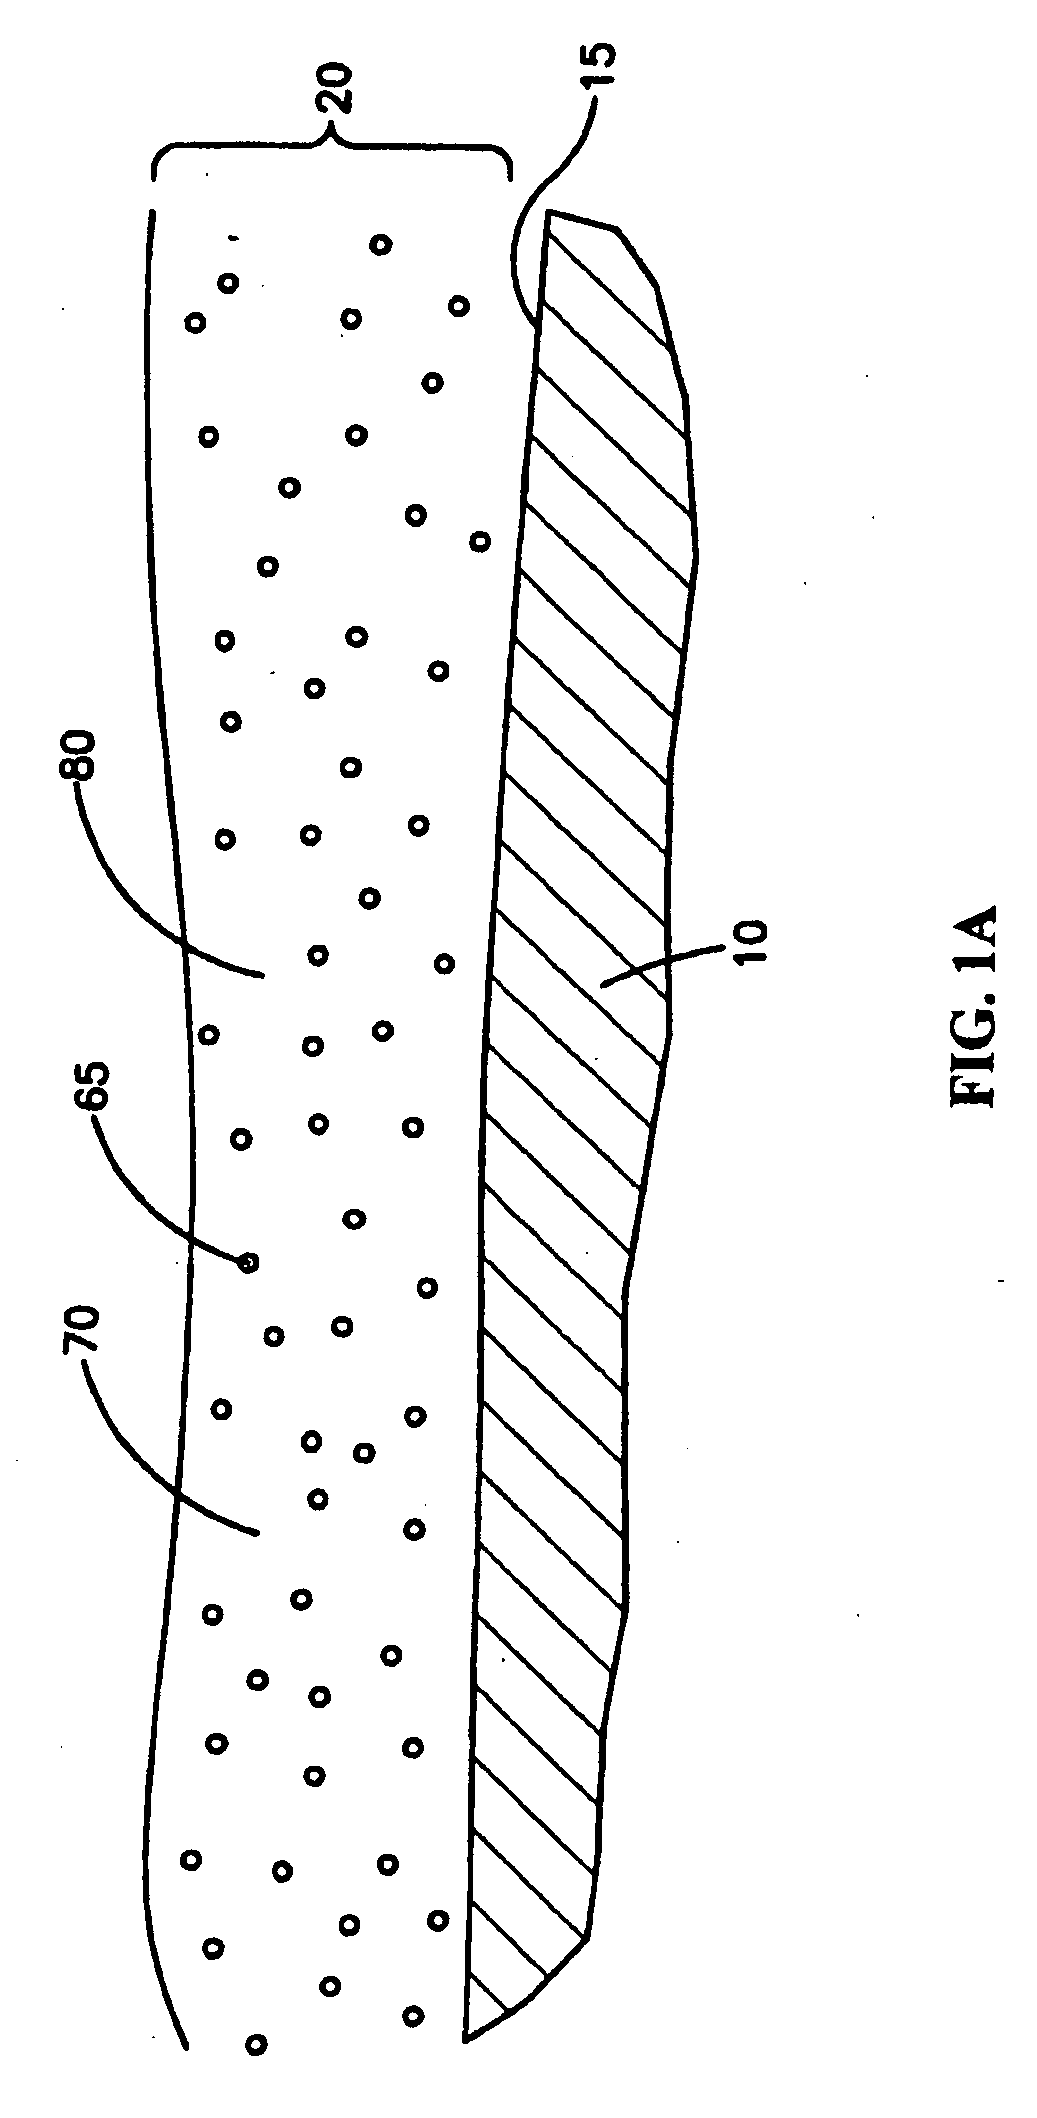 Medical devices with coatings for delivery of a therapeutic agent